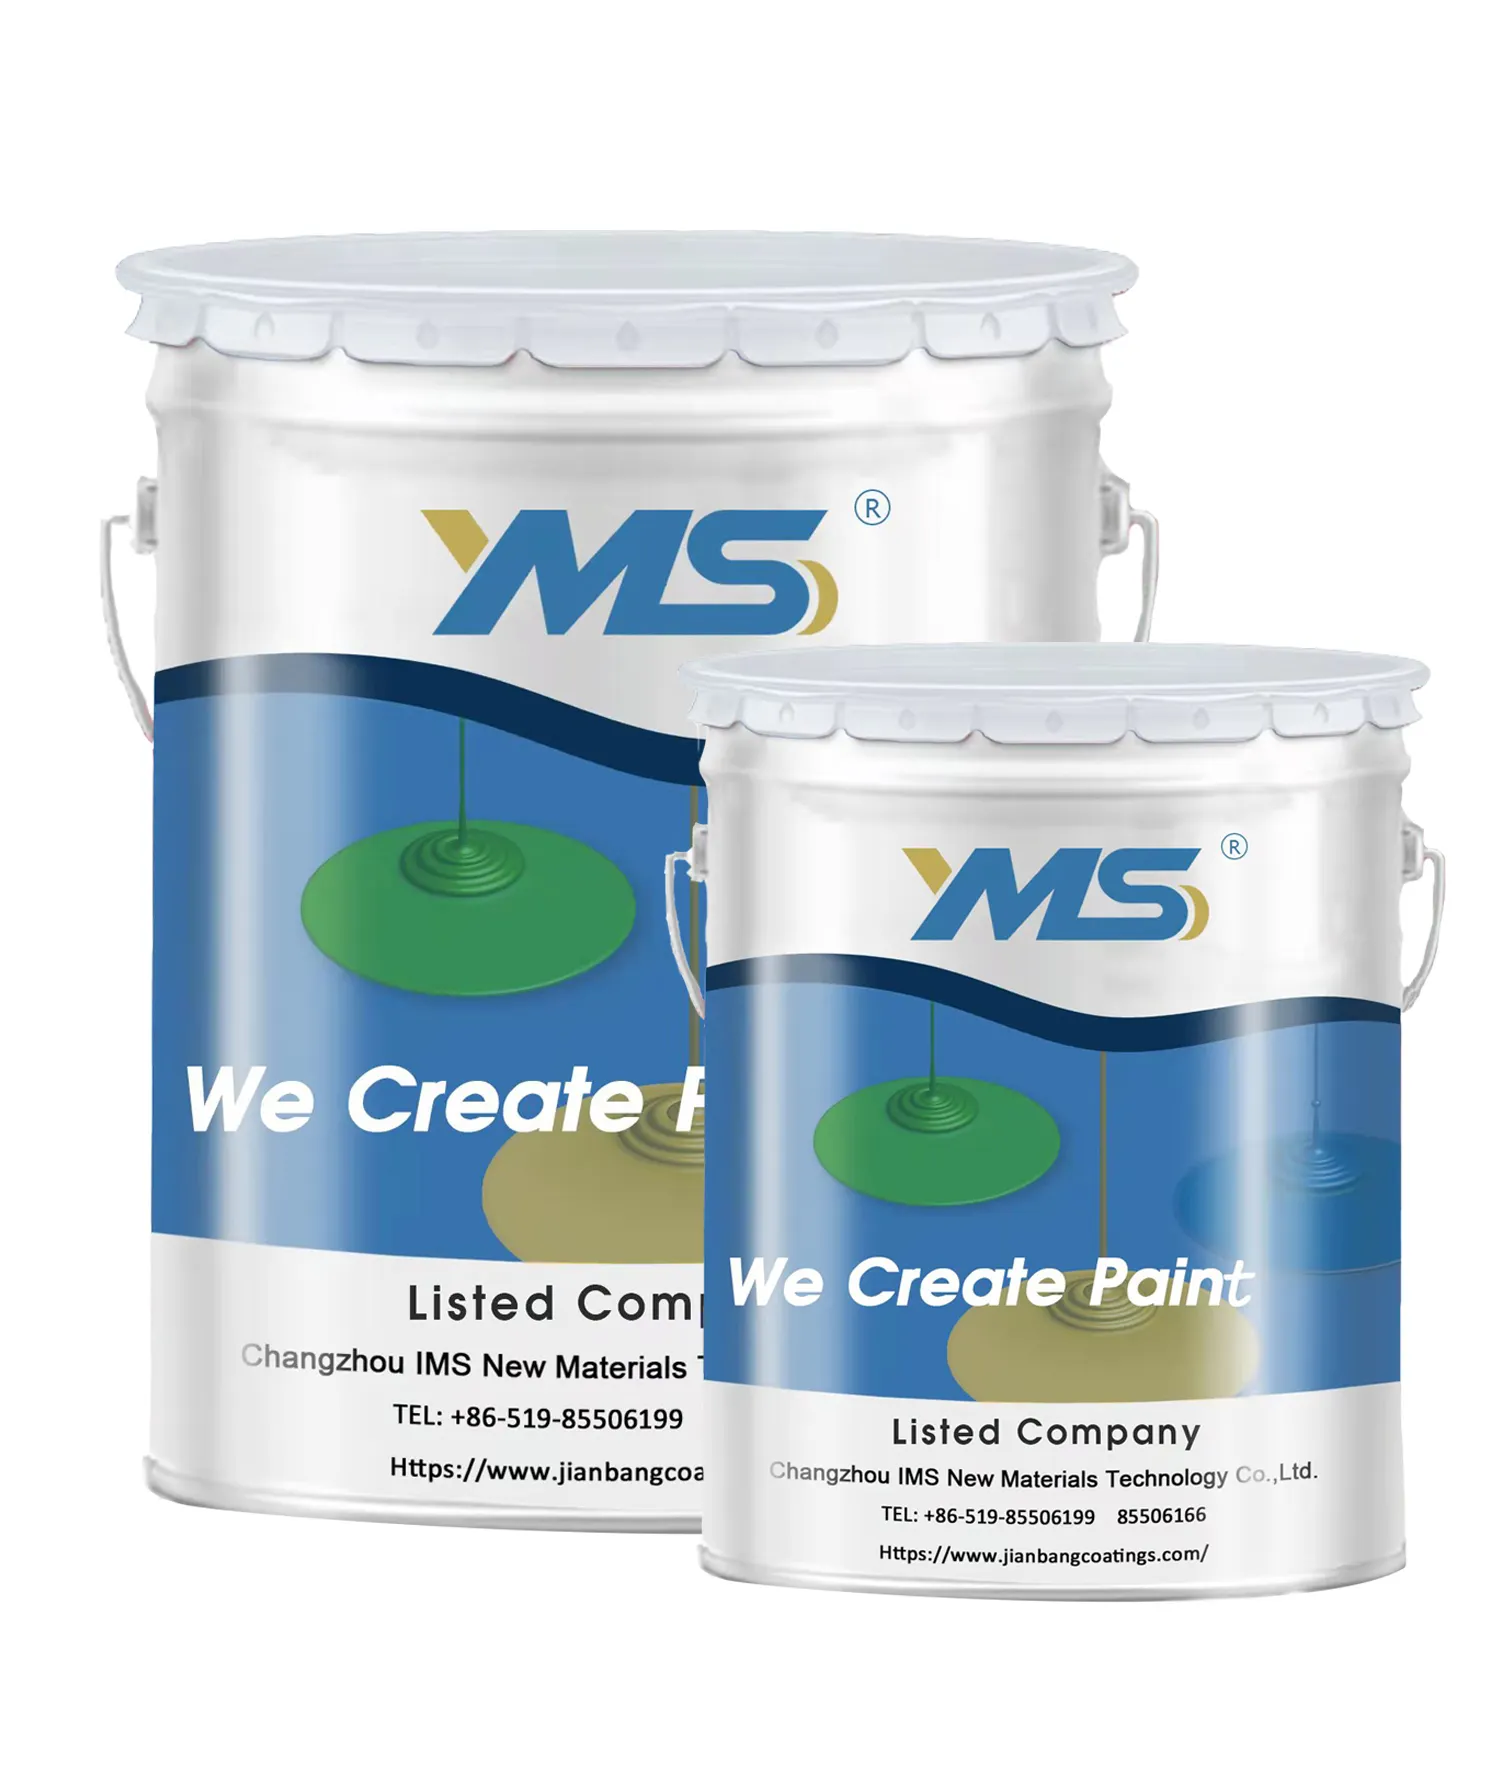 Polyurethane Waterproof Paint water resistant paint waterproofing coating for metal and Polyurethane exclusive thinner